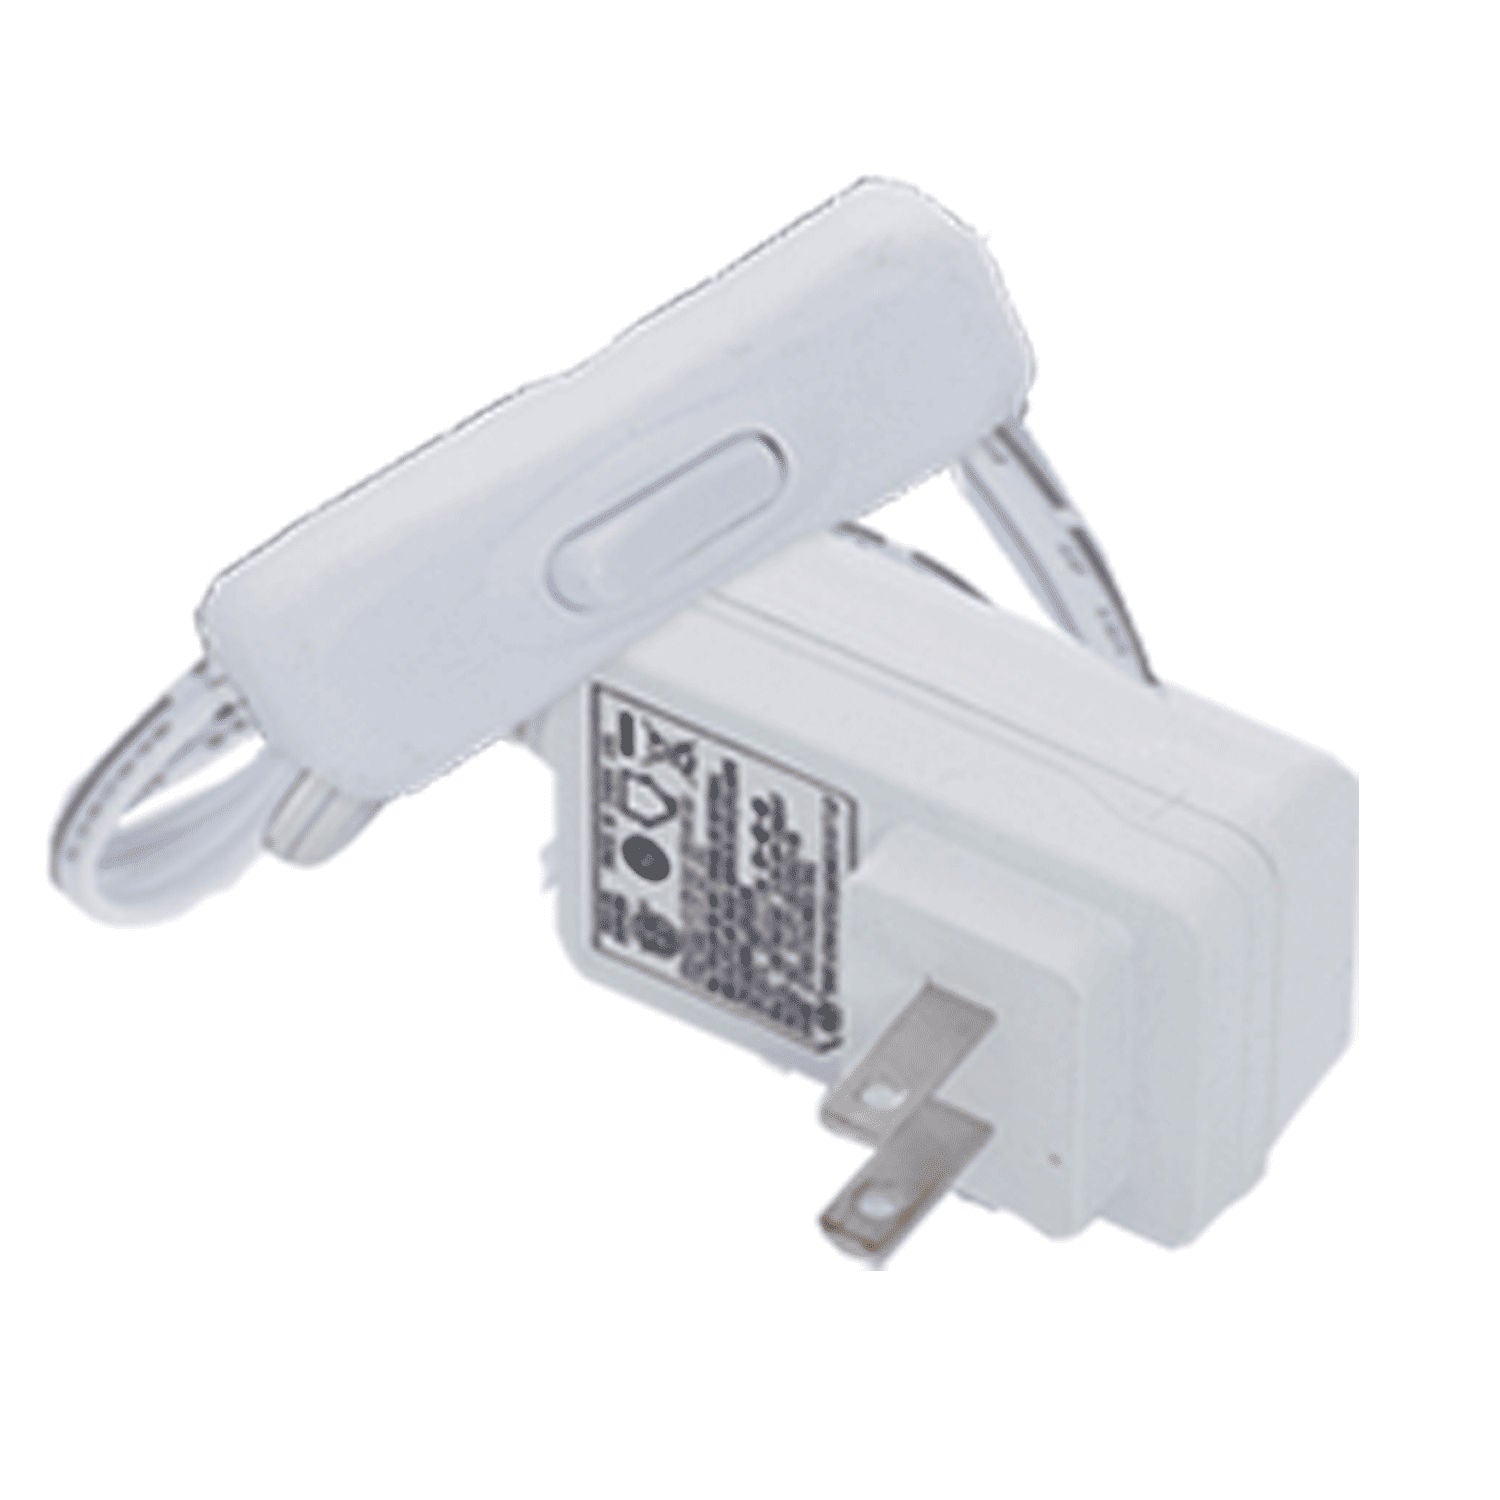 Westgate PL12-PIDR-24W-WH 24W Plug-in Driver For Puck/Strip Light - White